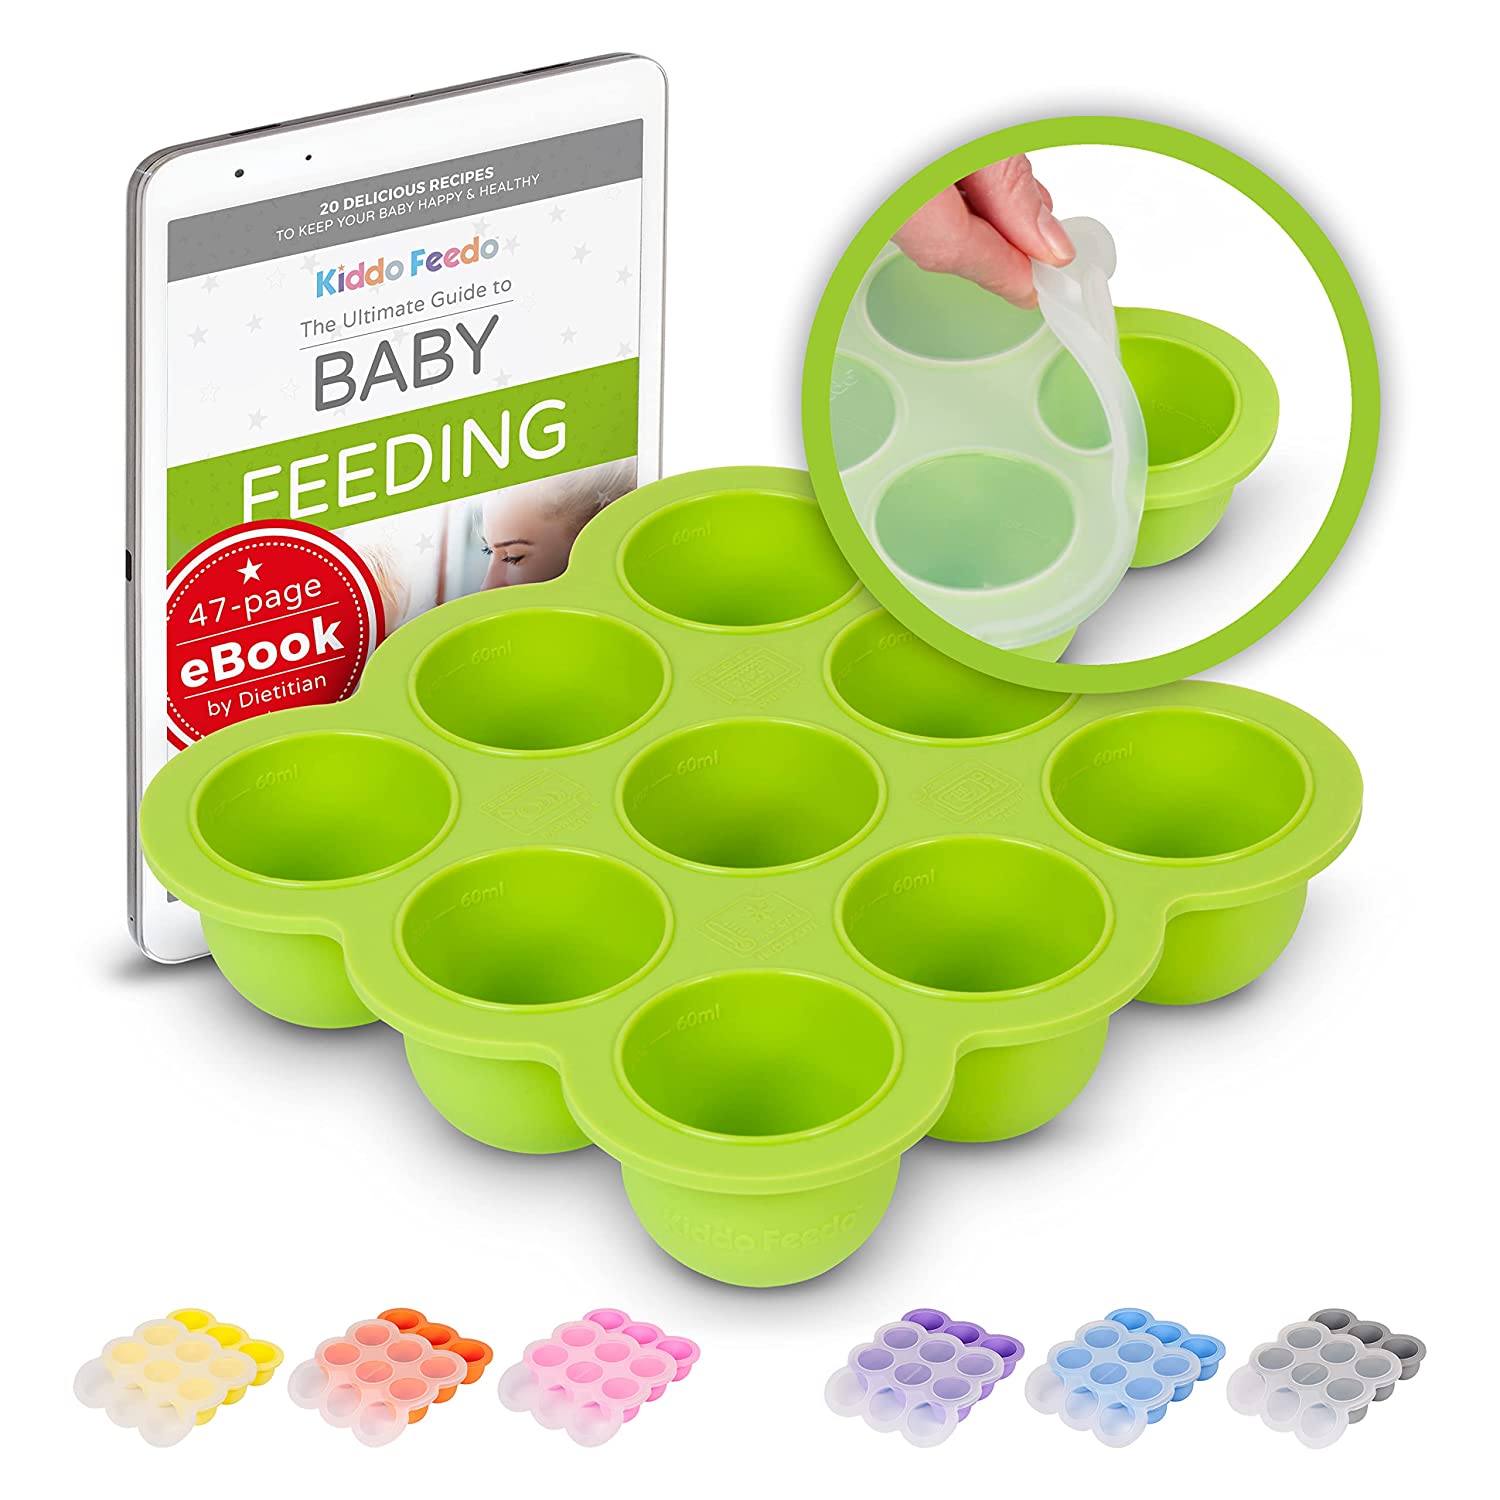 KIDDO FEEDO Easy Remove Silicone Baby Food Storage Container